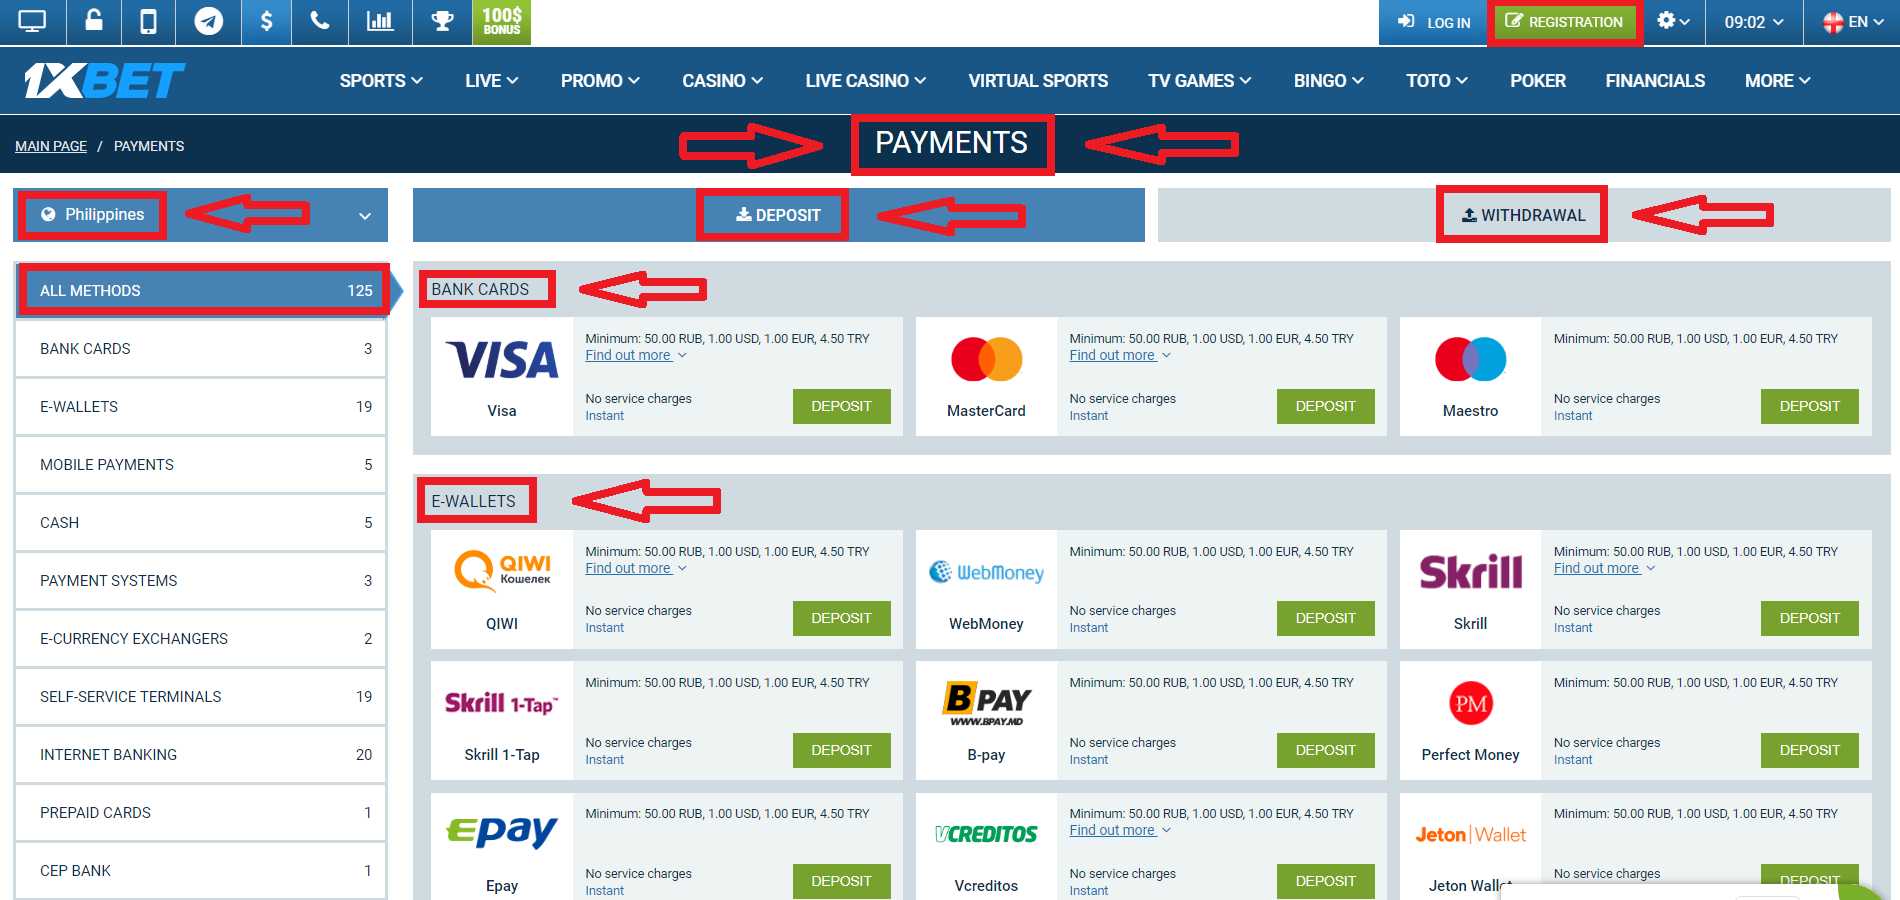 Payment Methods Supported by the 1 x Bet Mobile